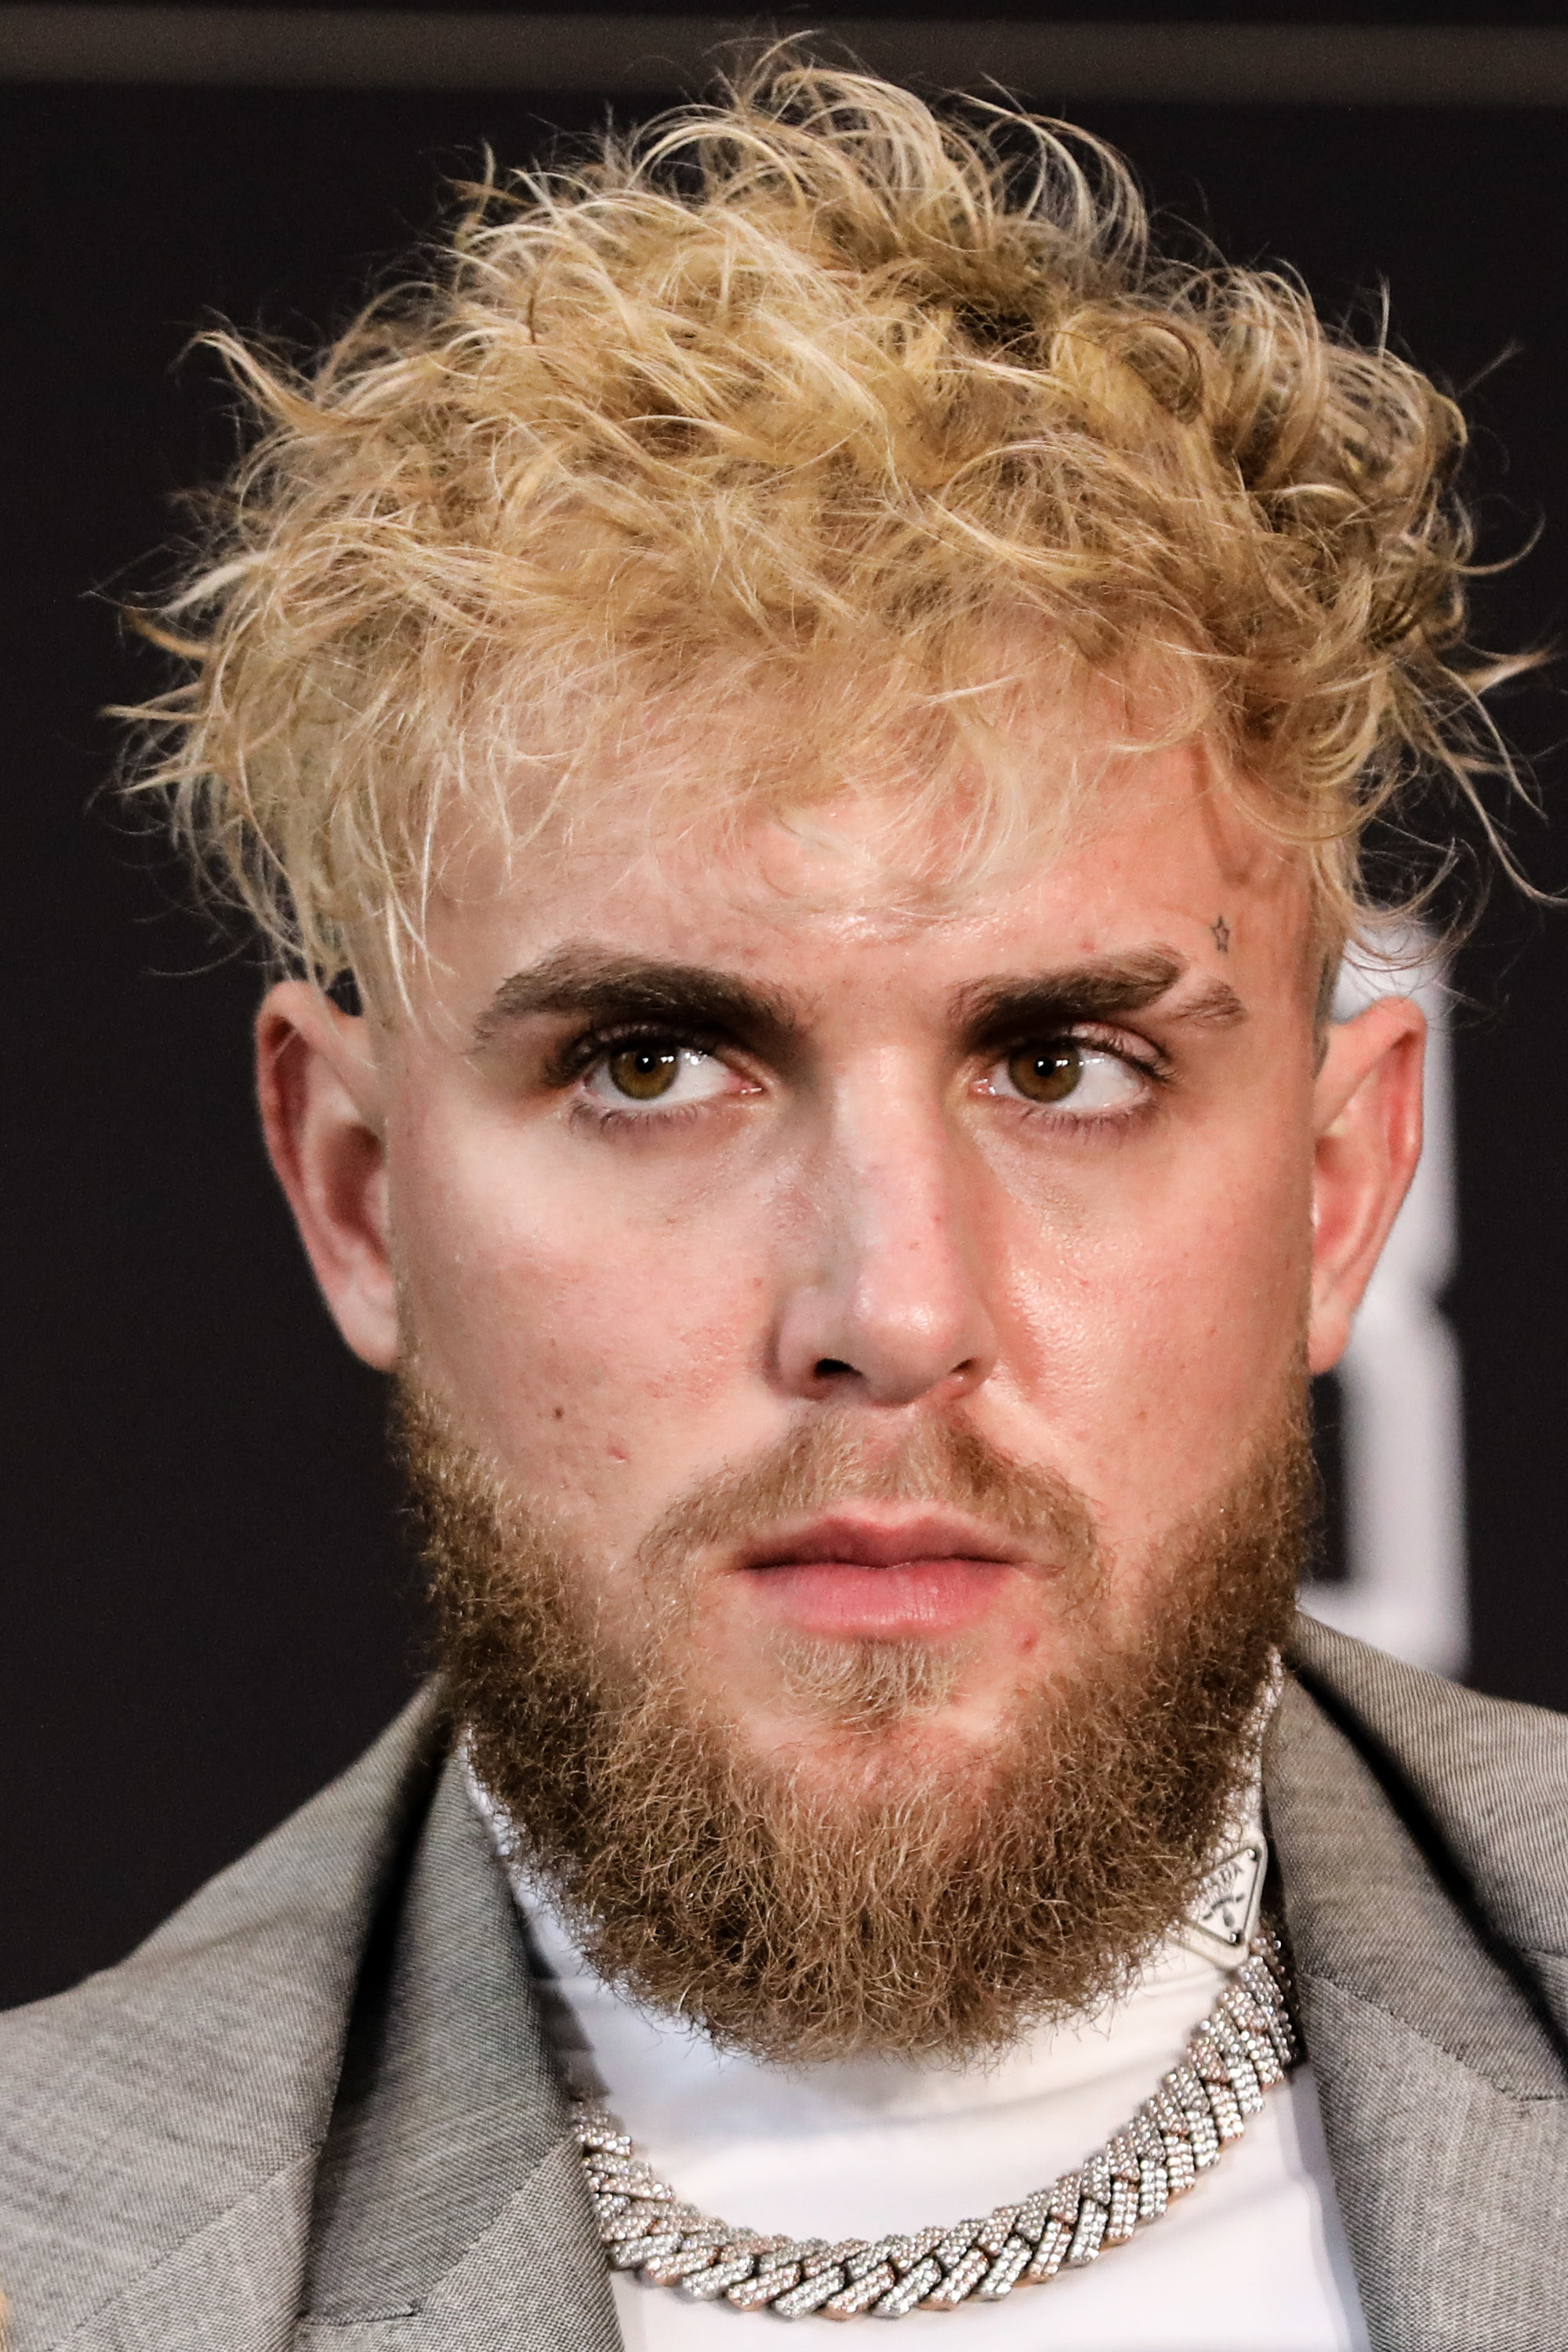 Jake Paul co-founder of Most Valuable Promotions attends the press conference at Madison Square Garden on April 30, 2022